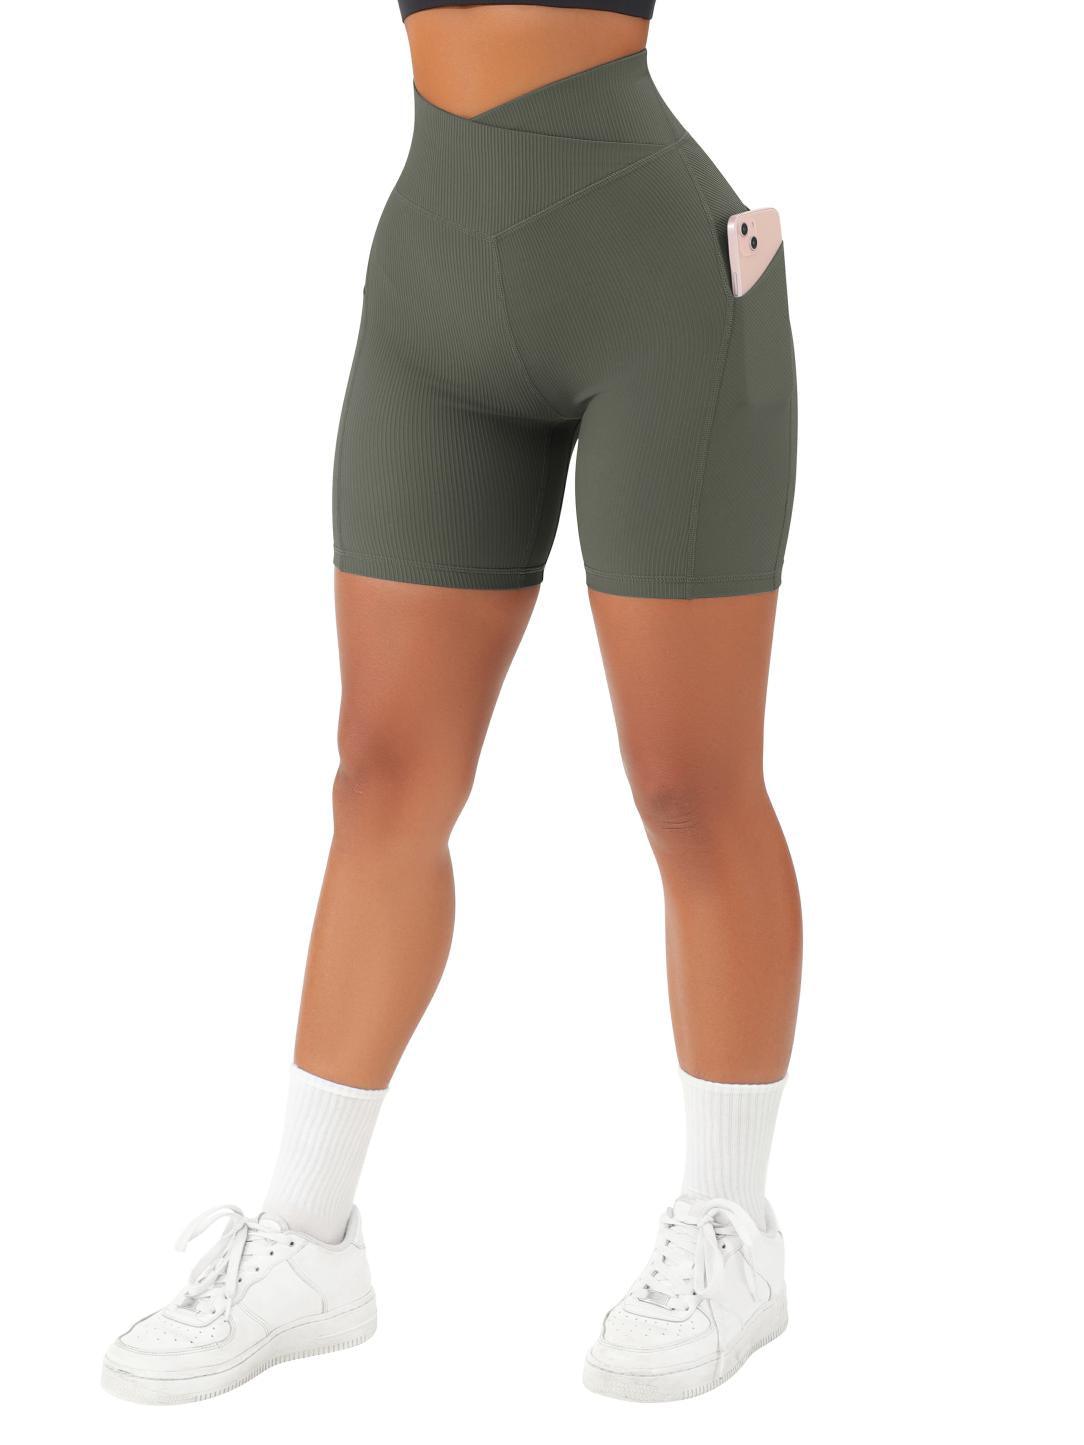 Crossover Sculpt Biker Shorts-Army Green-Suuksess Women&#39;s Shorts for Running, Sports, Hiking - Lululemon Dupe, Gymshark Dupe, Fabletics Dupe